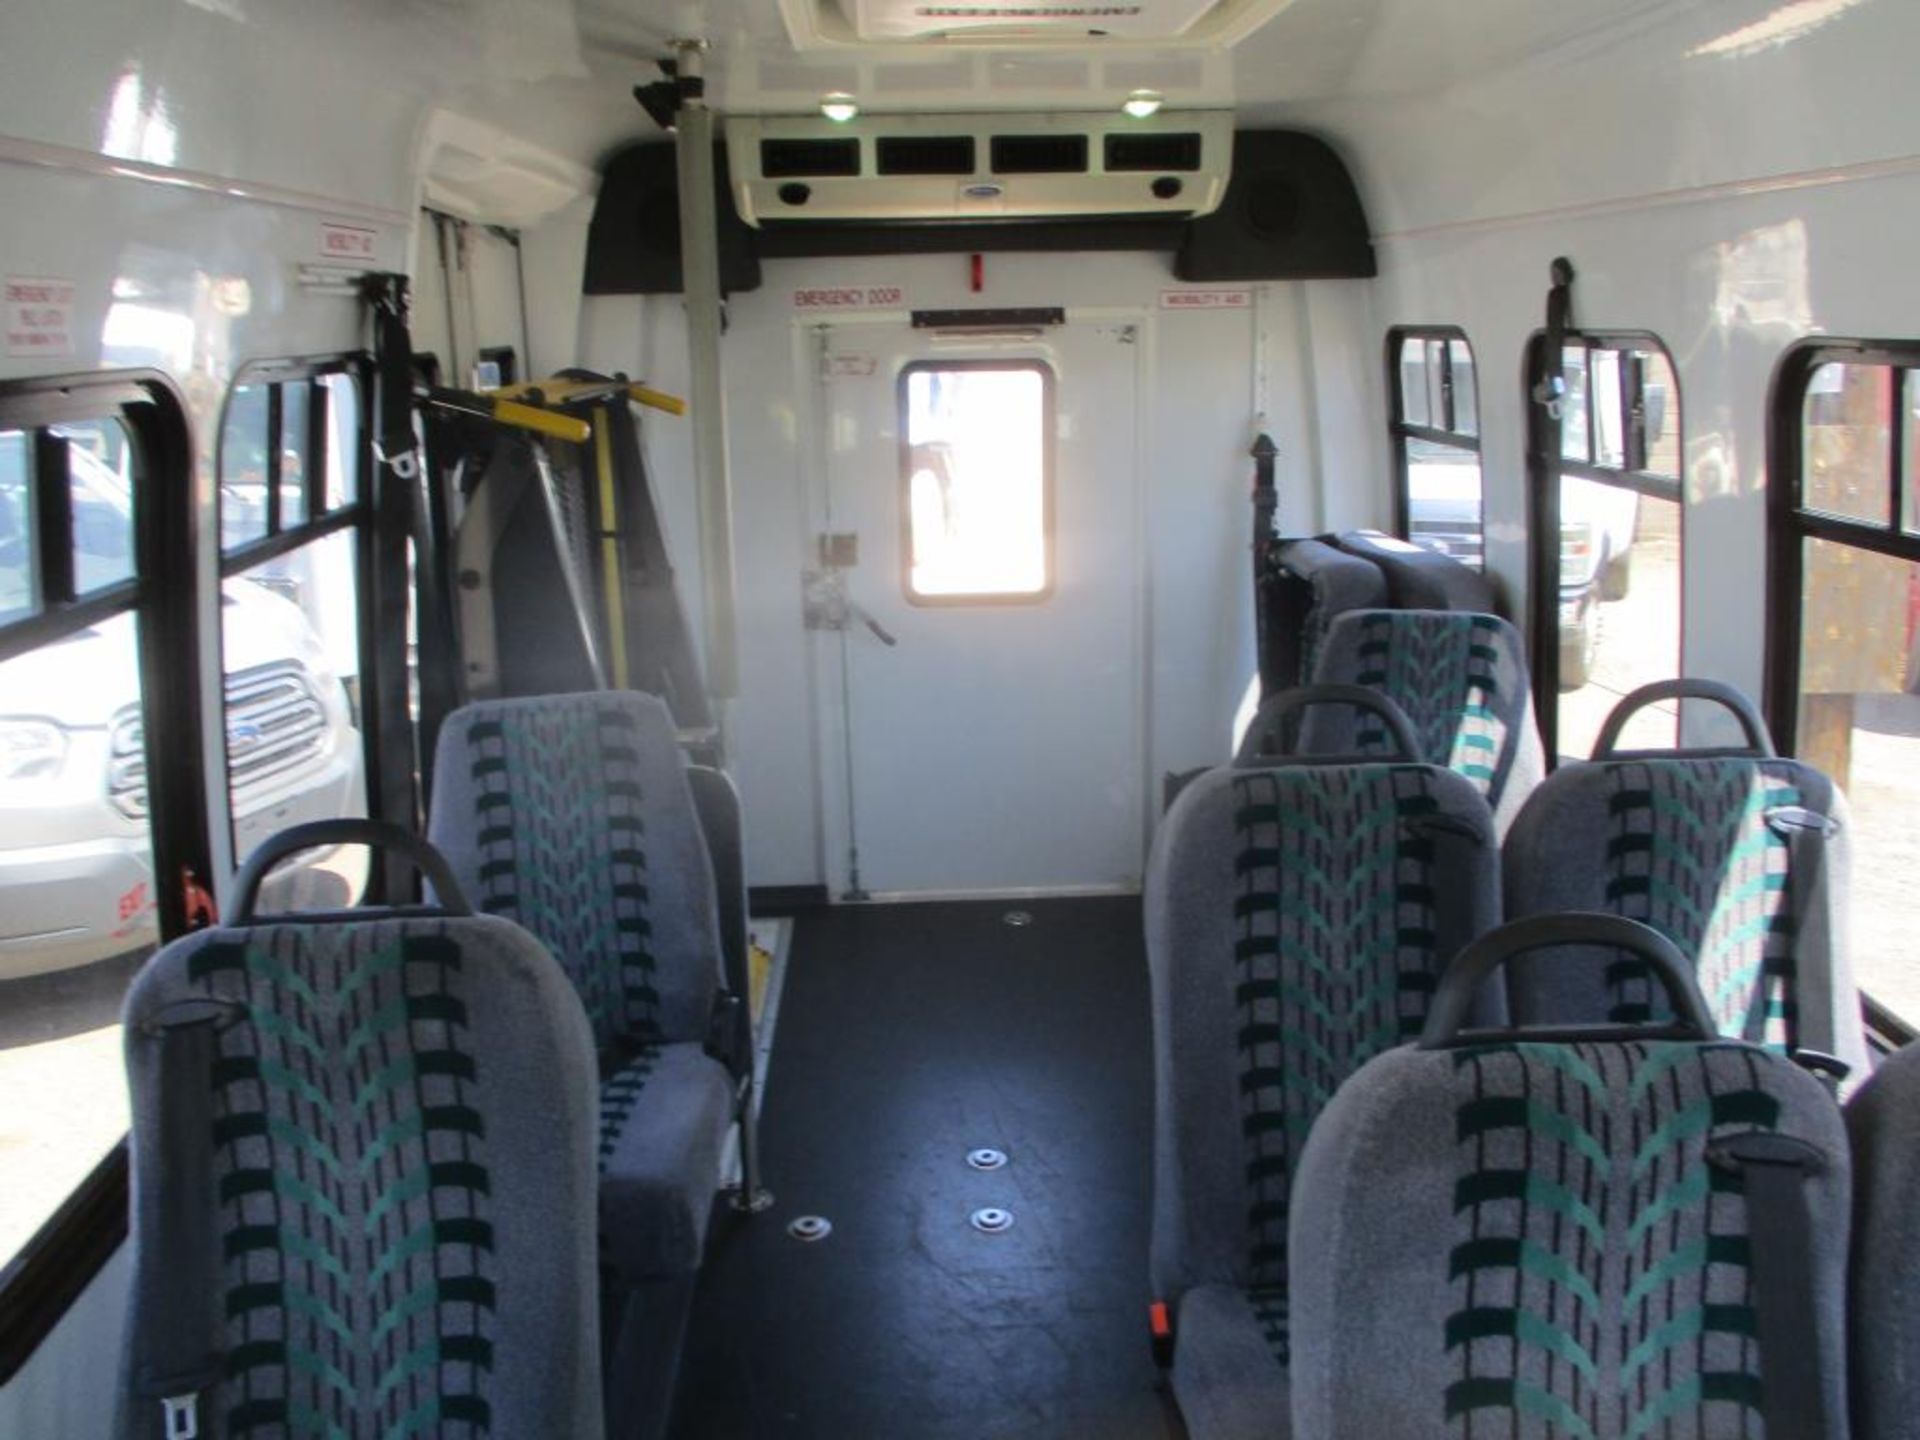 2011 Ford E-350 Shuttle Bus - Image 6 of 13